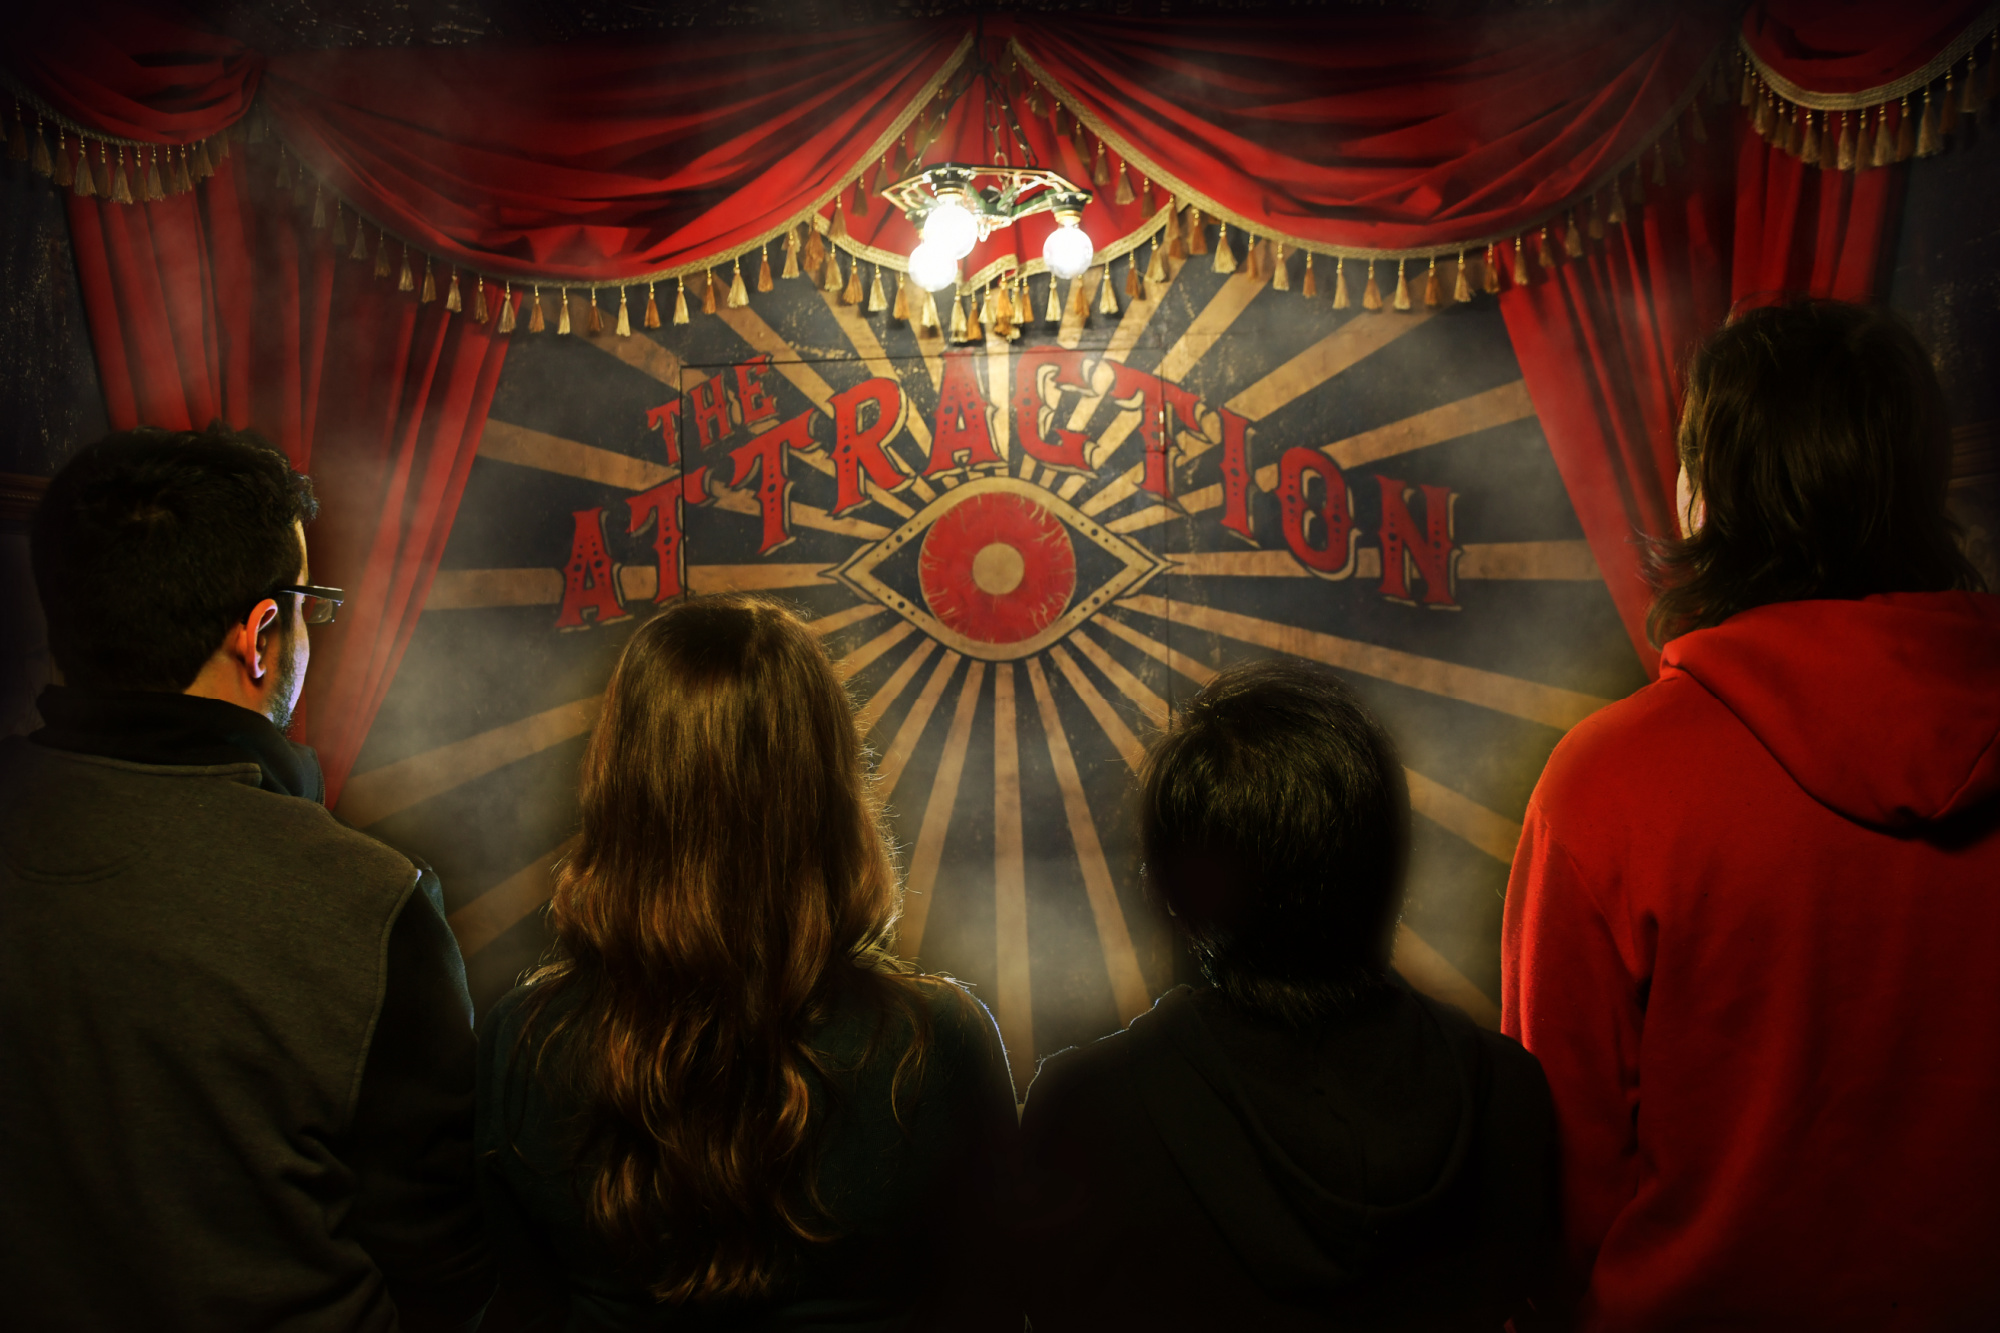 Four people stand facing the other way looking at an old-fashioned magic sign reading The Attraction above a red eyeball.